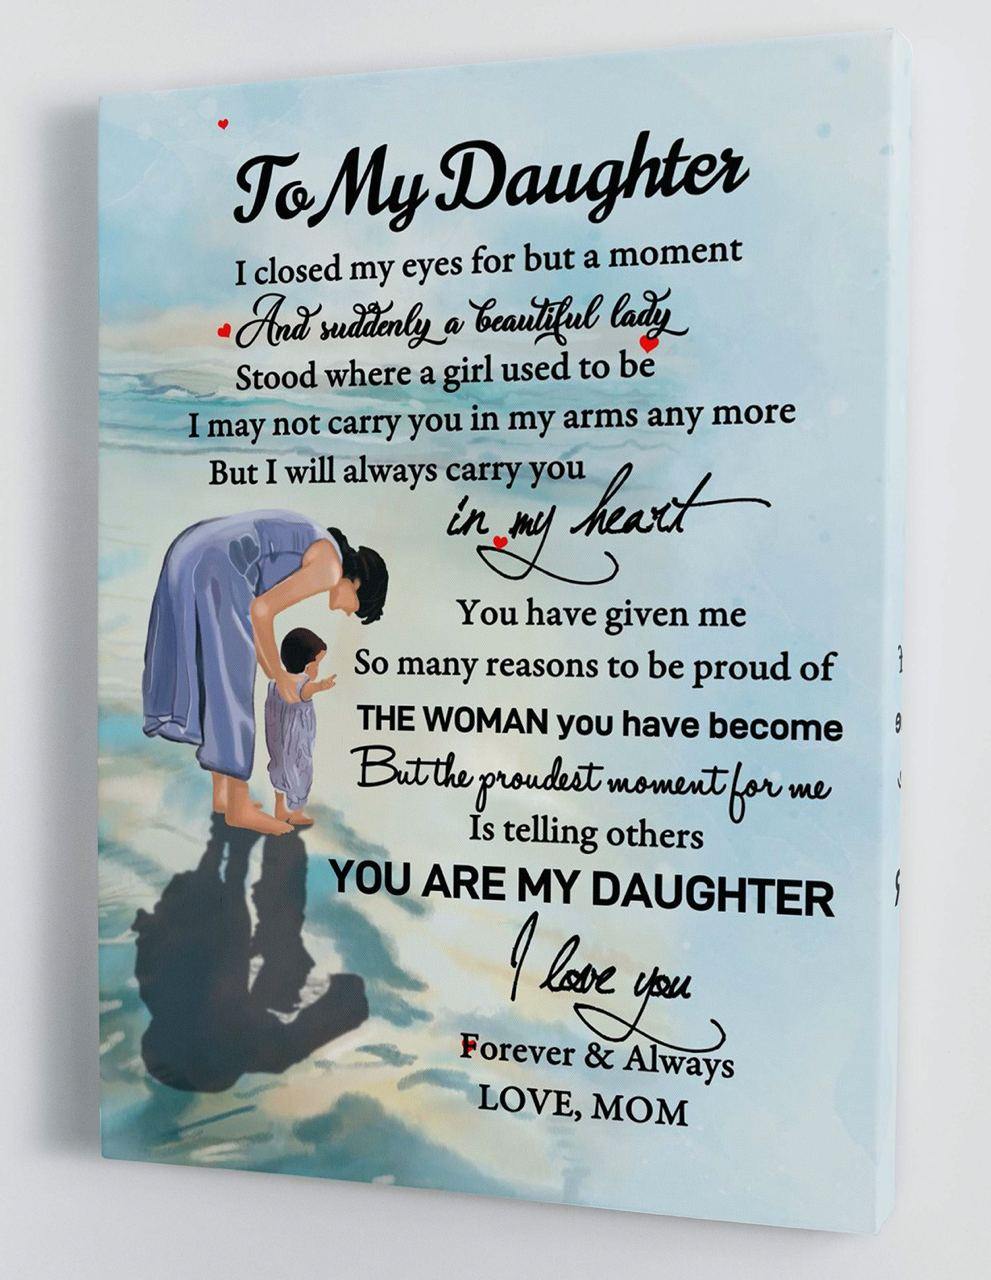 To My Daughter - From Mom - Framed Canvas Gift MD052 - DivesArt LLC